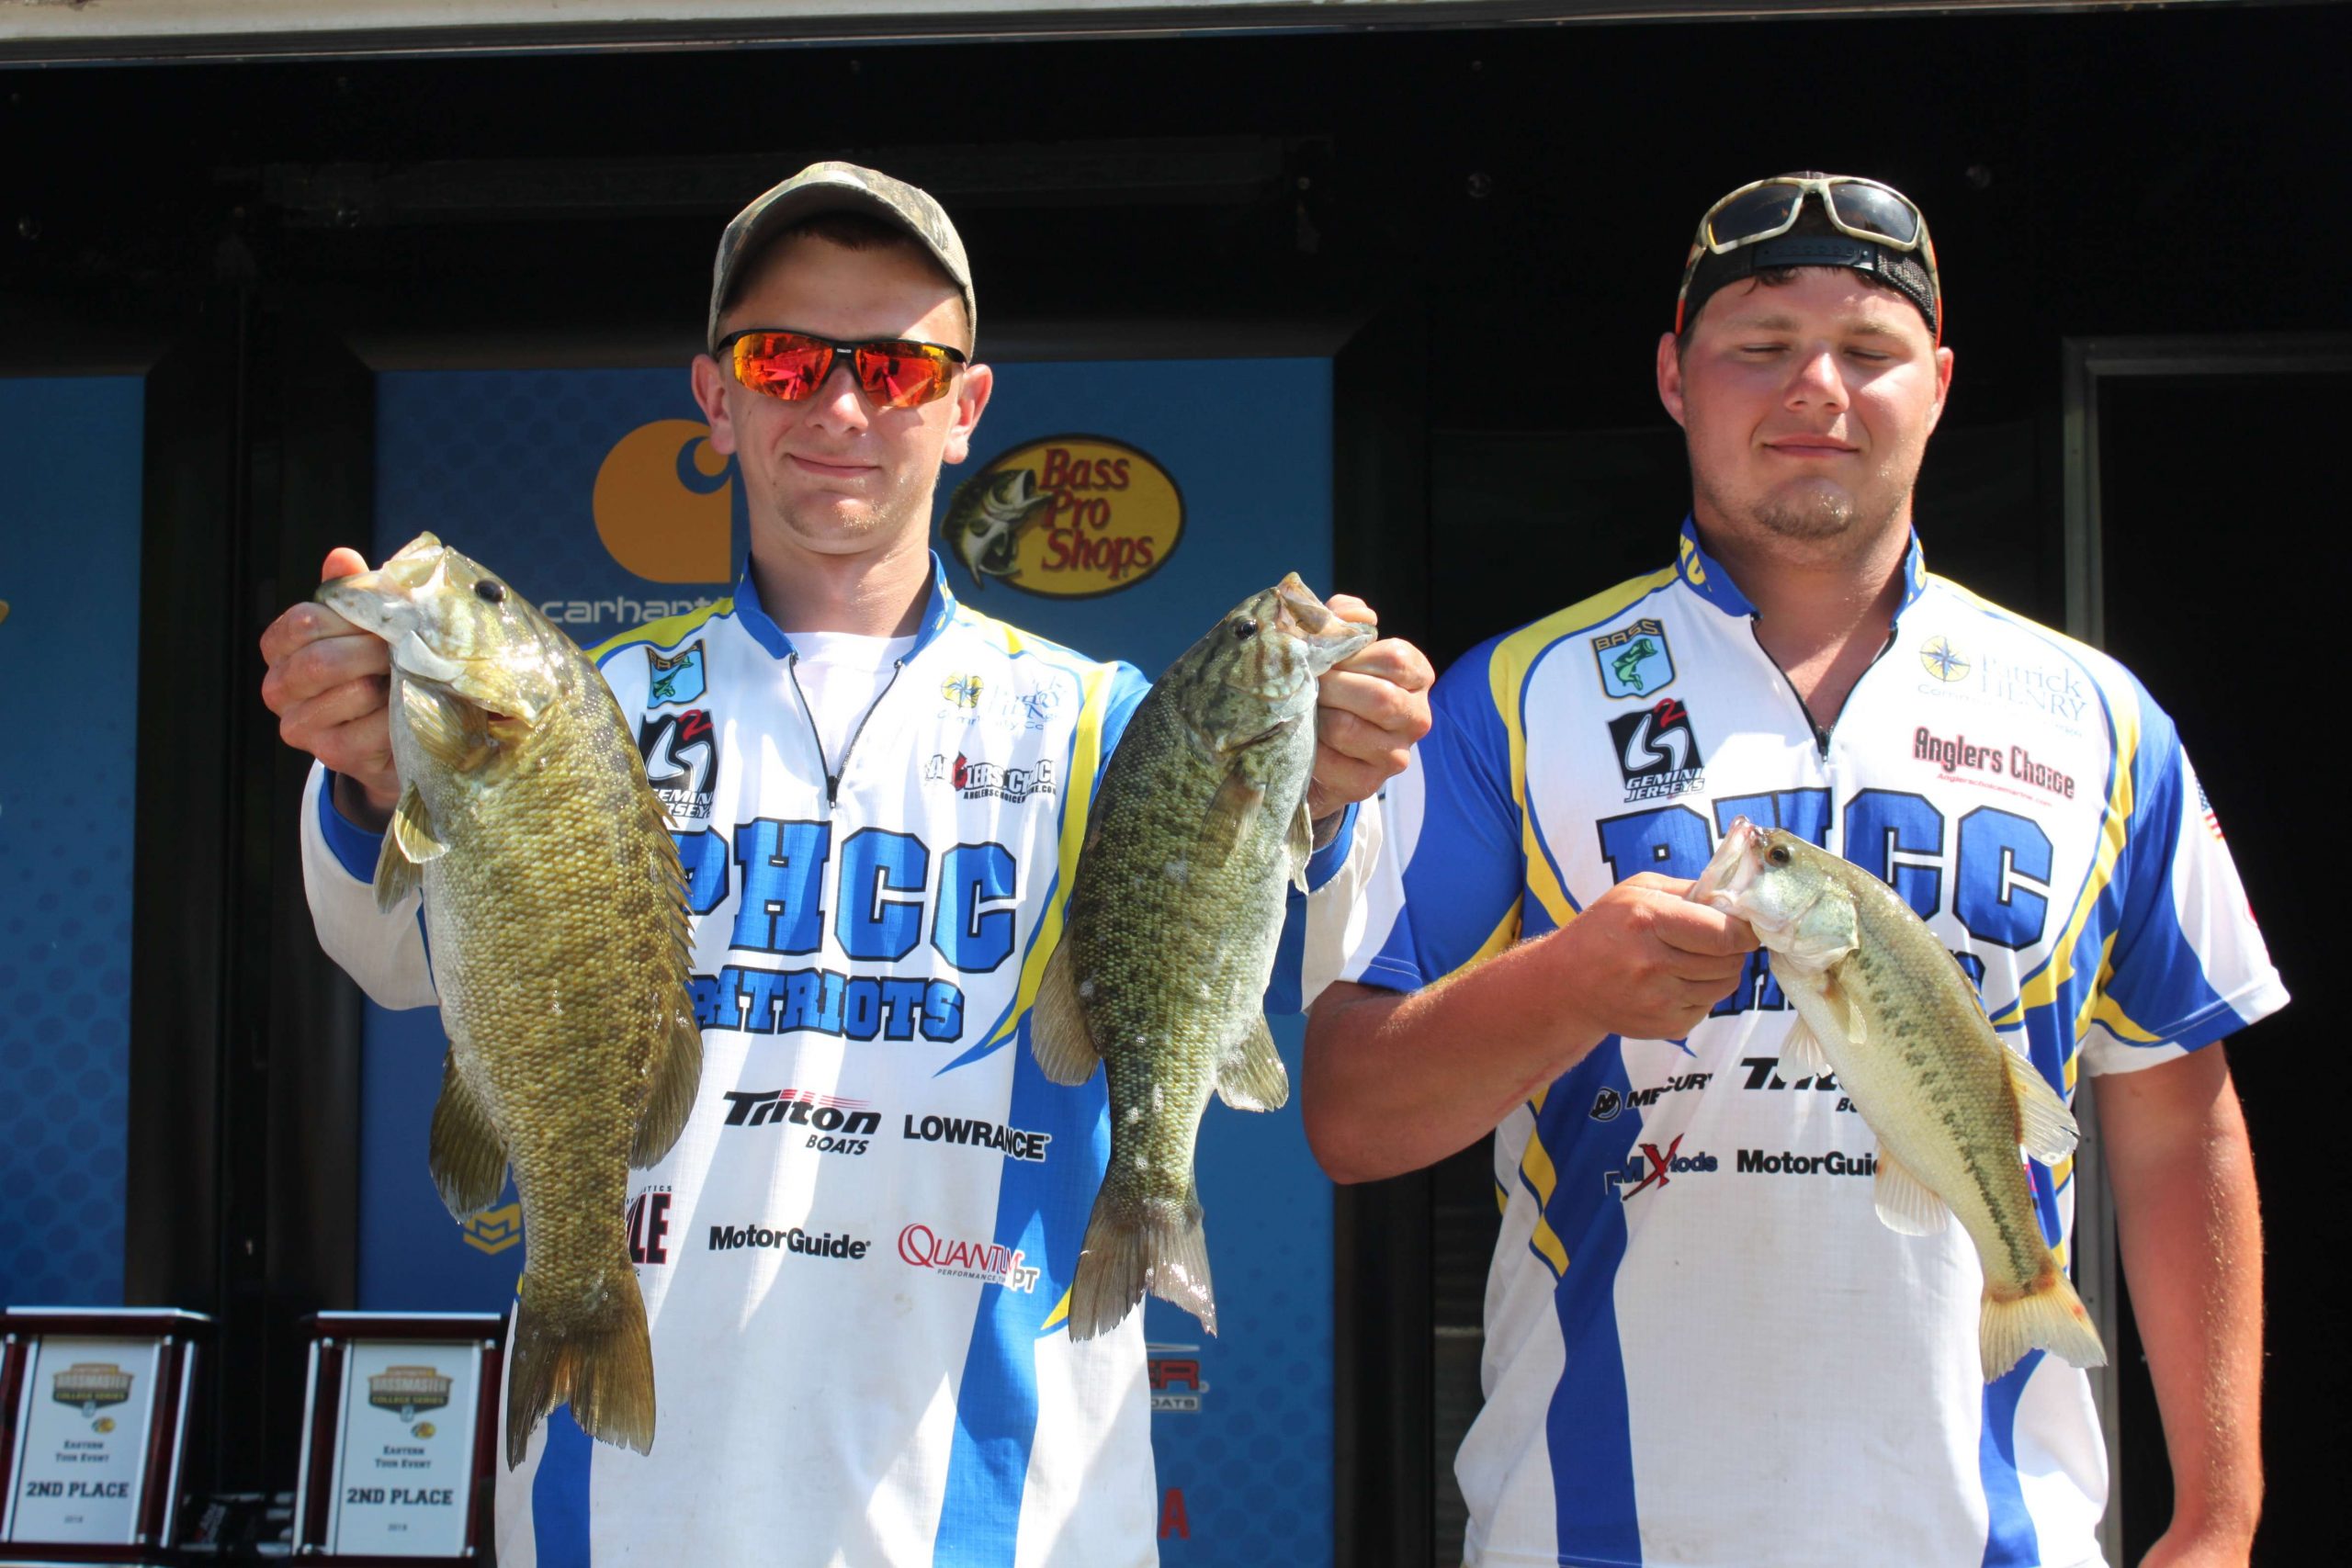 Dillon Bryant and Dustin Wagner of Patrick Henry Community College placed 30th with 30-3.